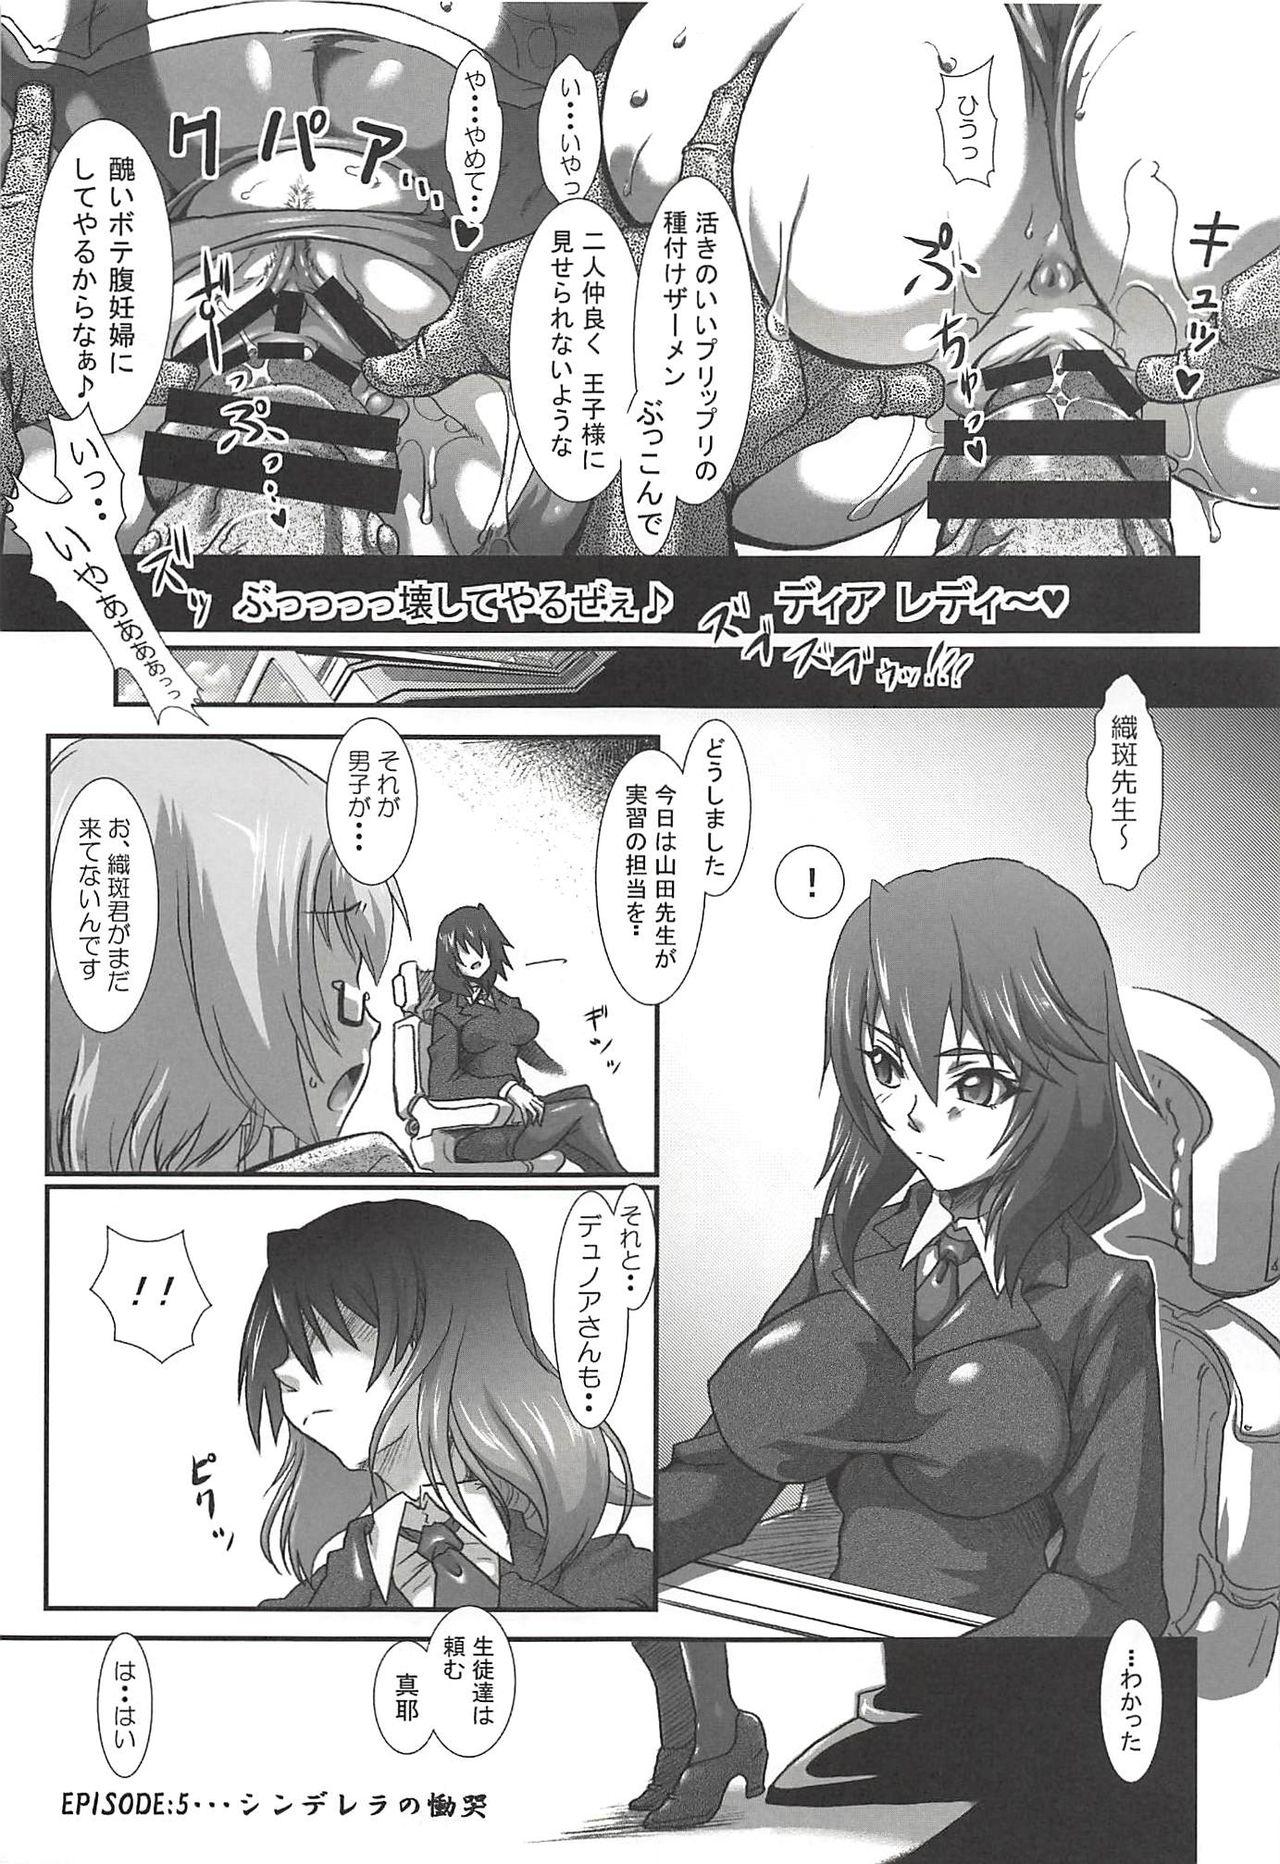 Thick Ura Choroi Report - MOON OF THE TWILIGHT - Infinite stratos Blowjob - Page 8